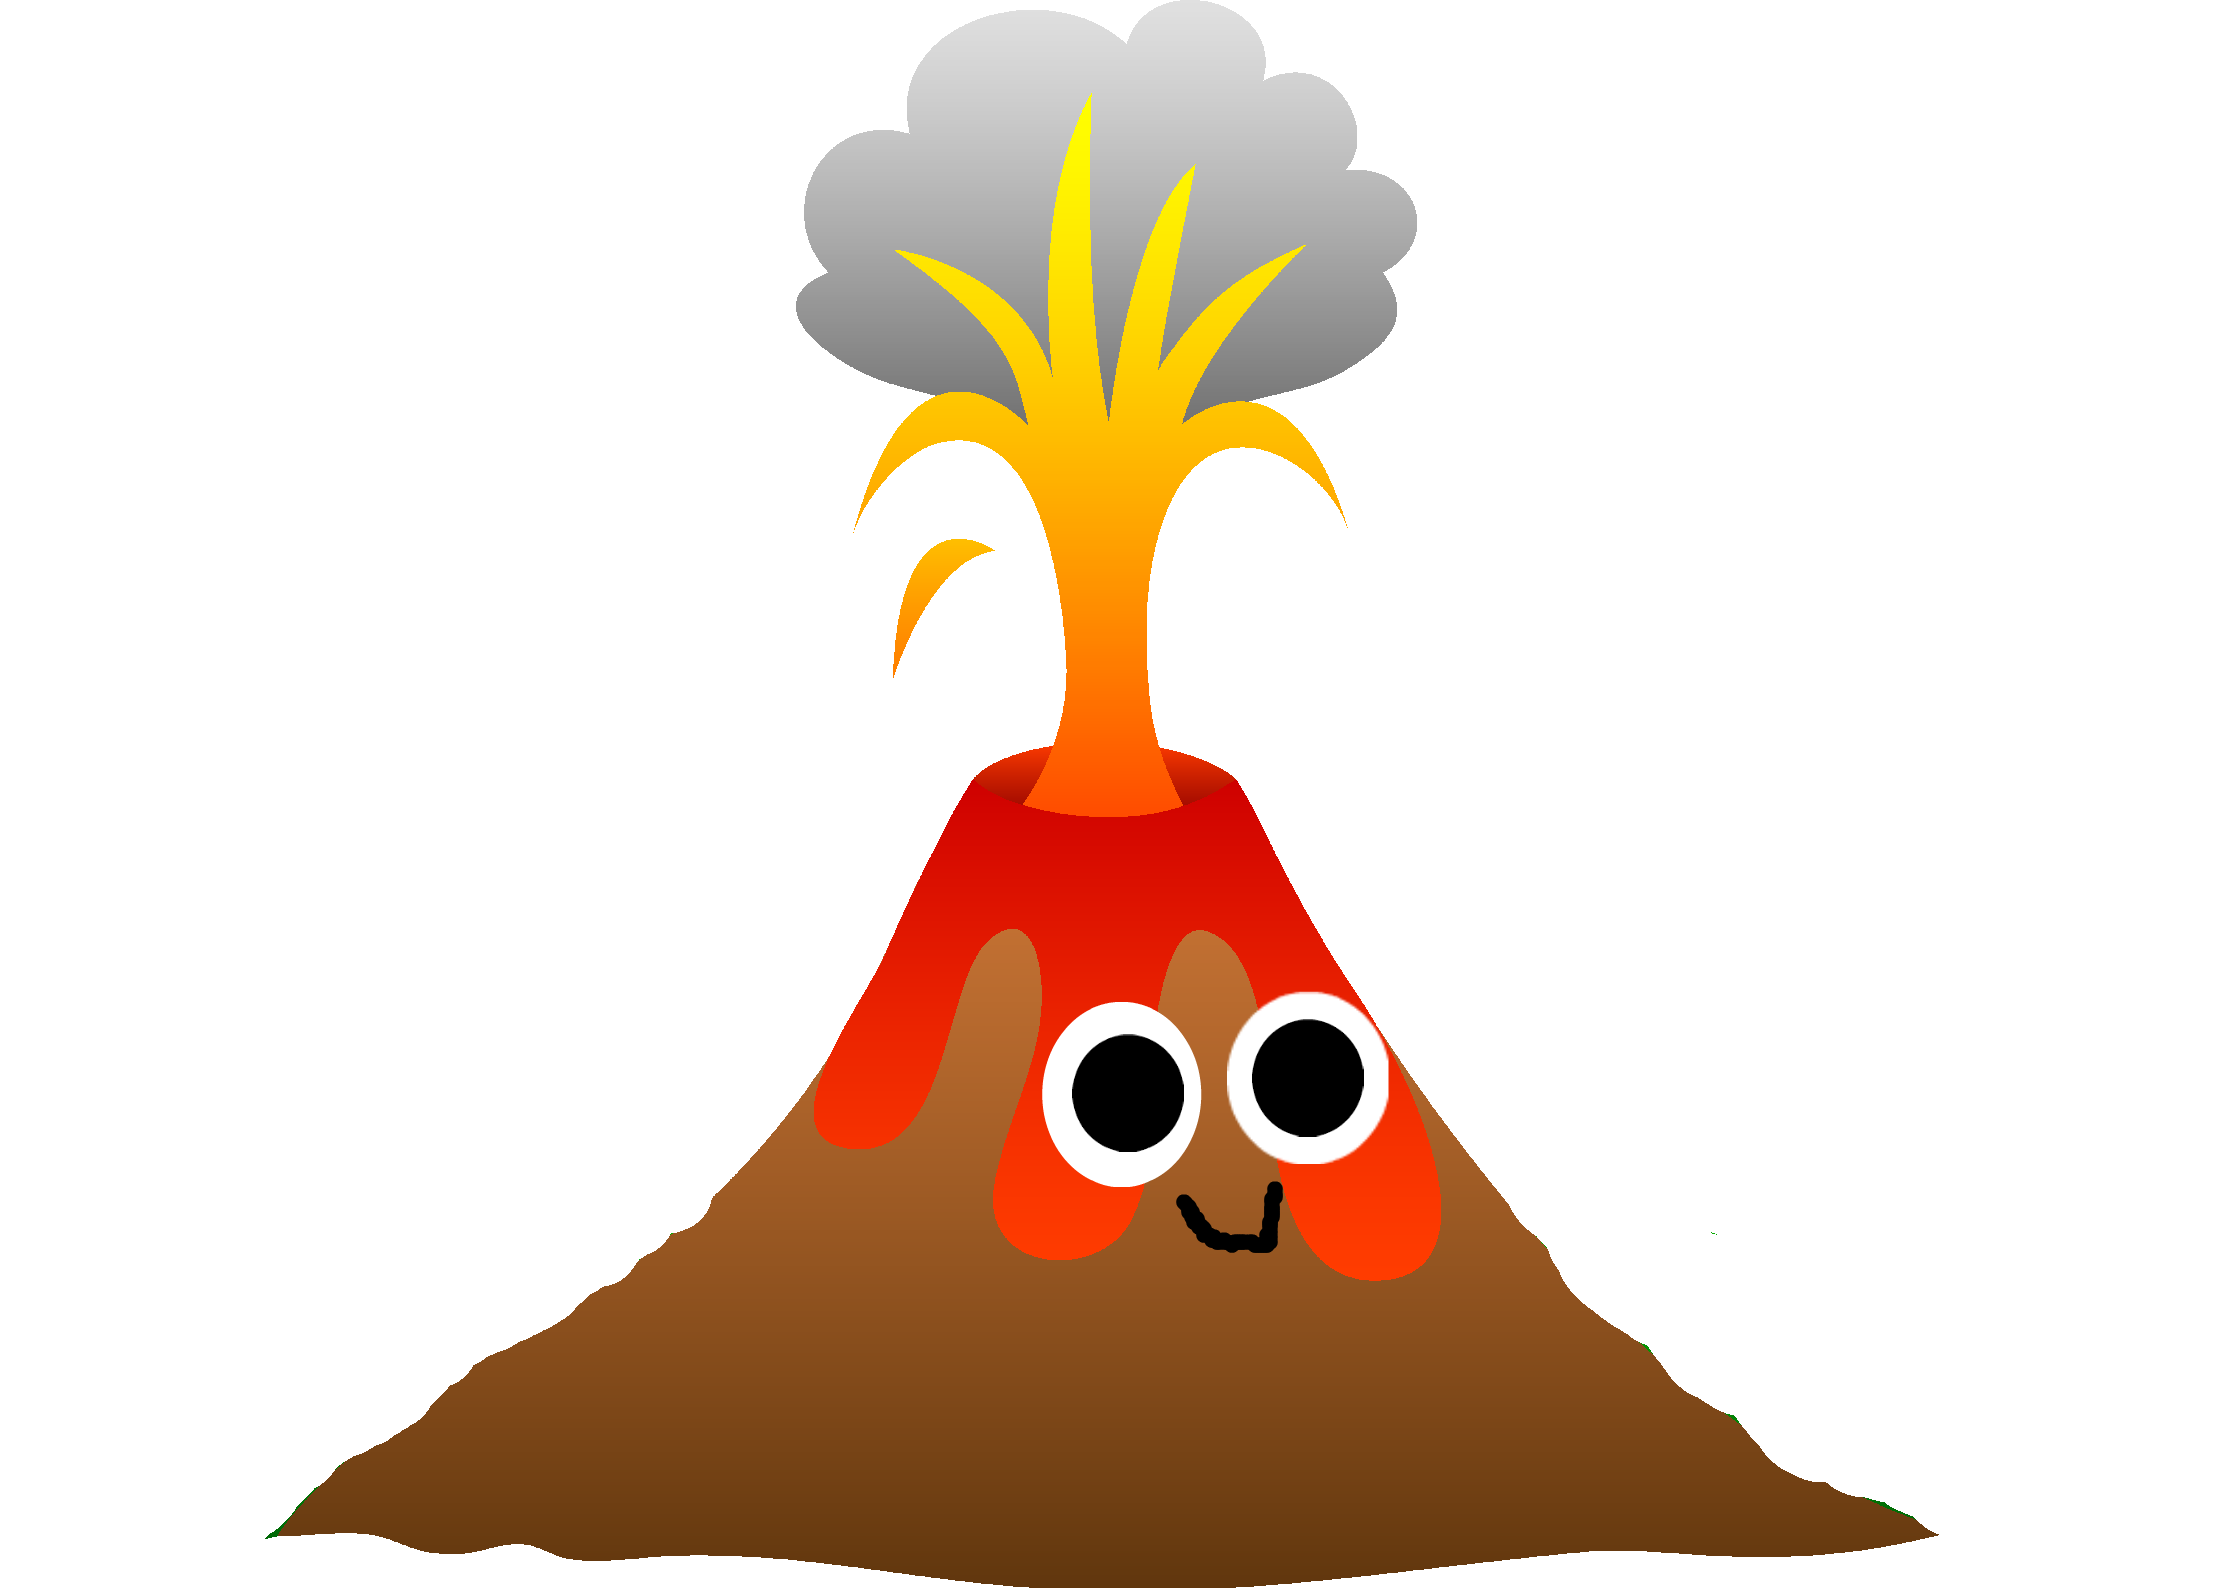 Animate png files. Volcano eruption drawing at